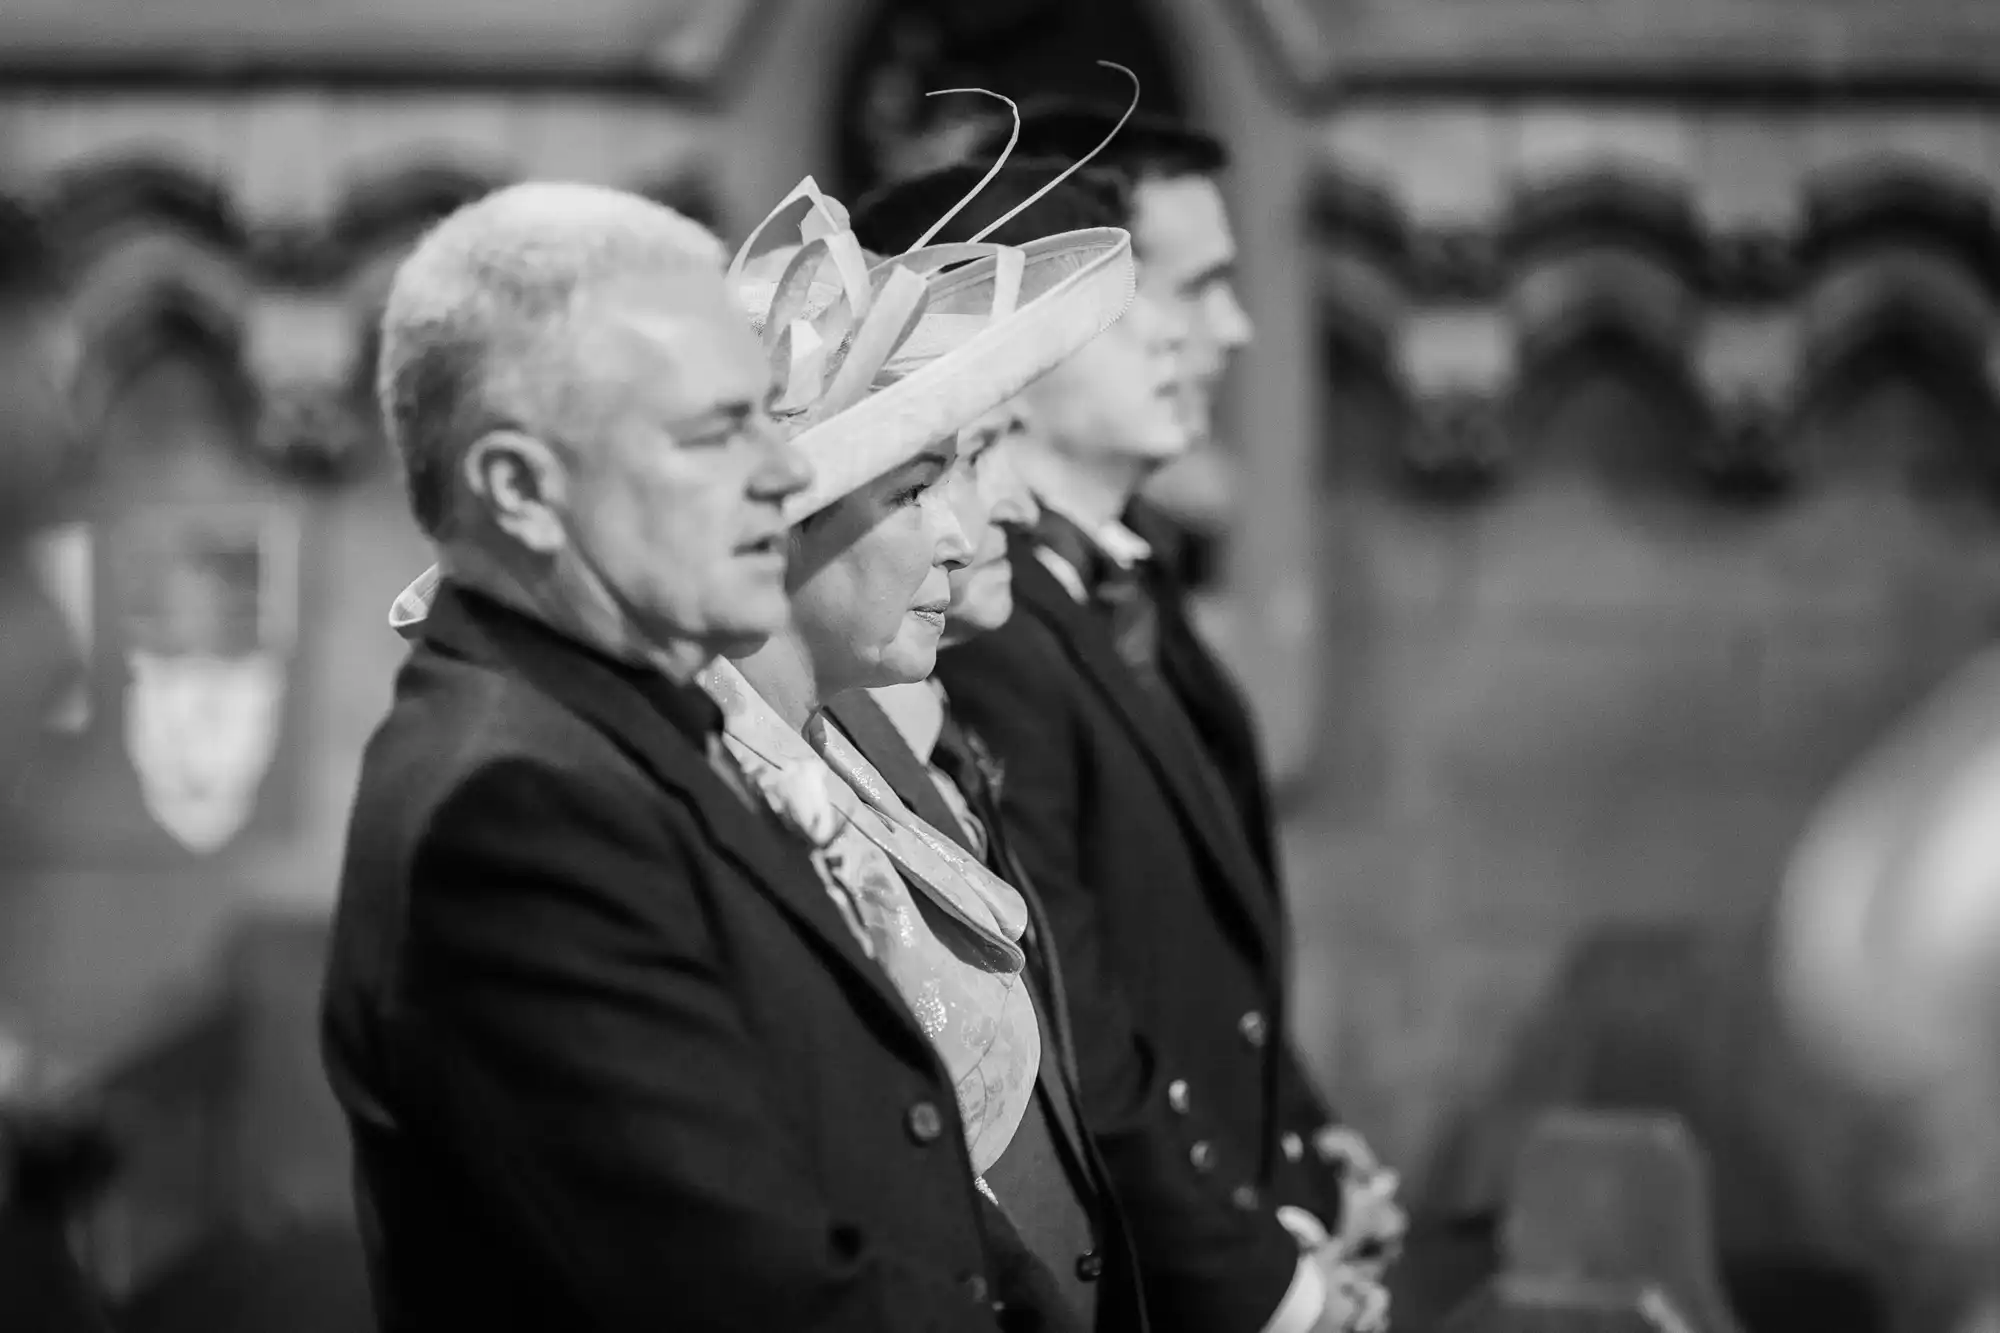 Three adults attending a formal event, standing solemnly side by side; the middle woman is wearing a large hat. the image is in black and white.